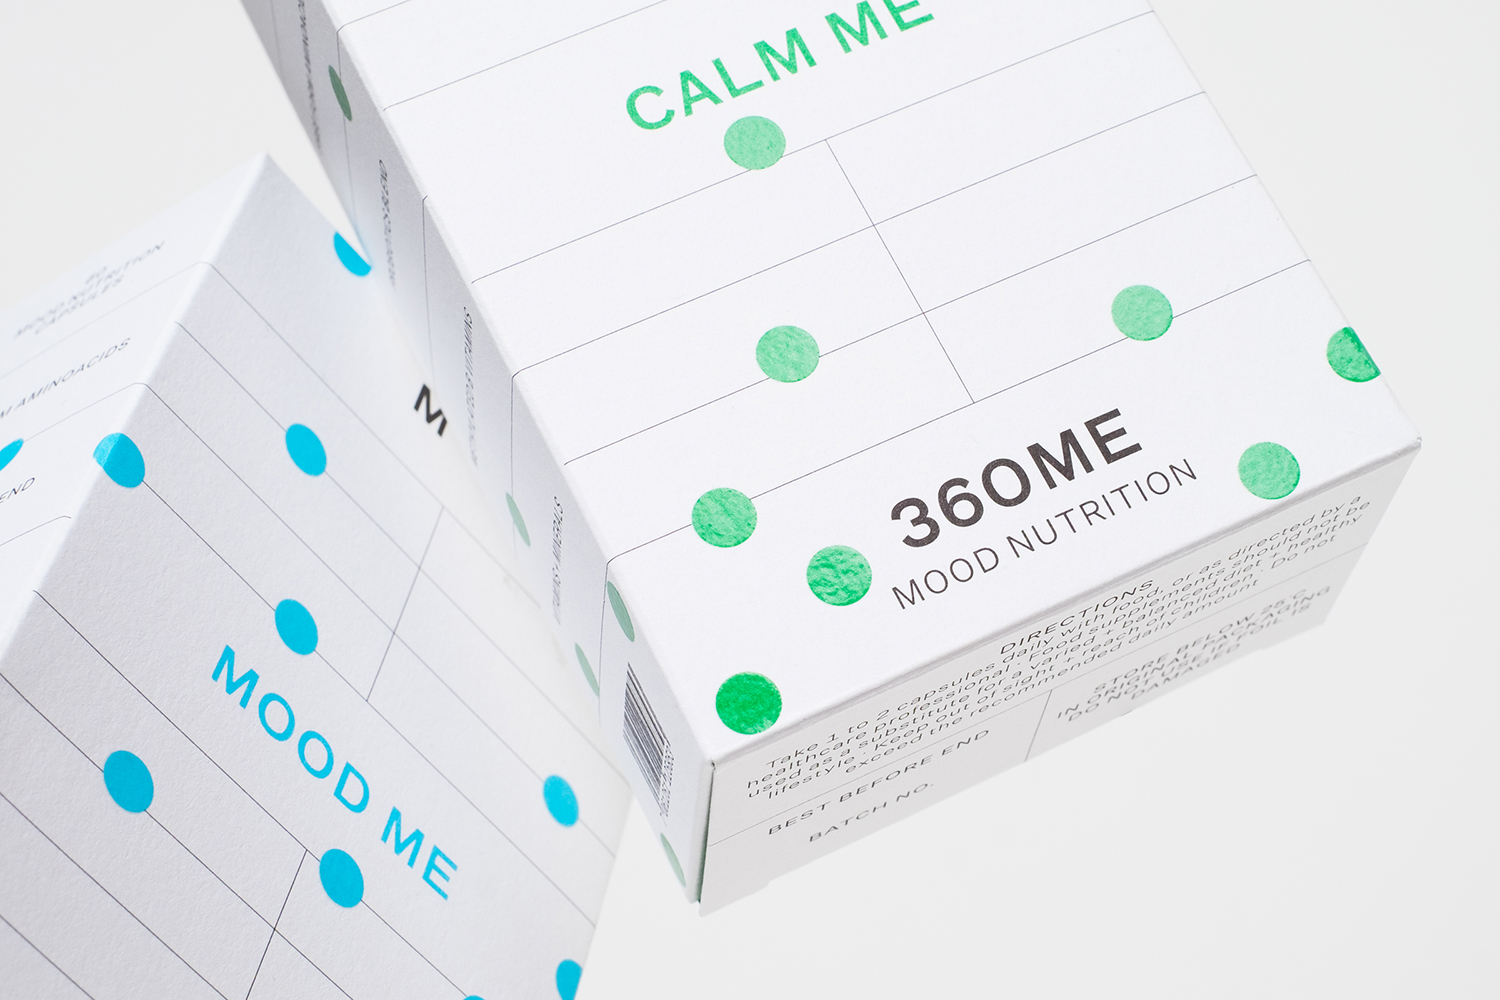 Packaging design by Studio Makgill for supplement company Montgomery+Evelyn's new range 360ME